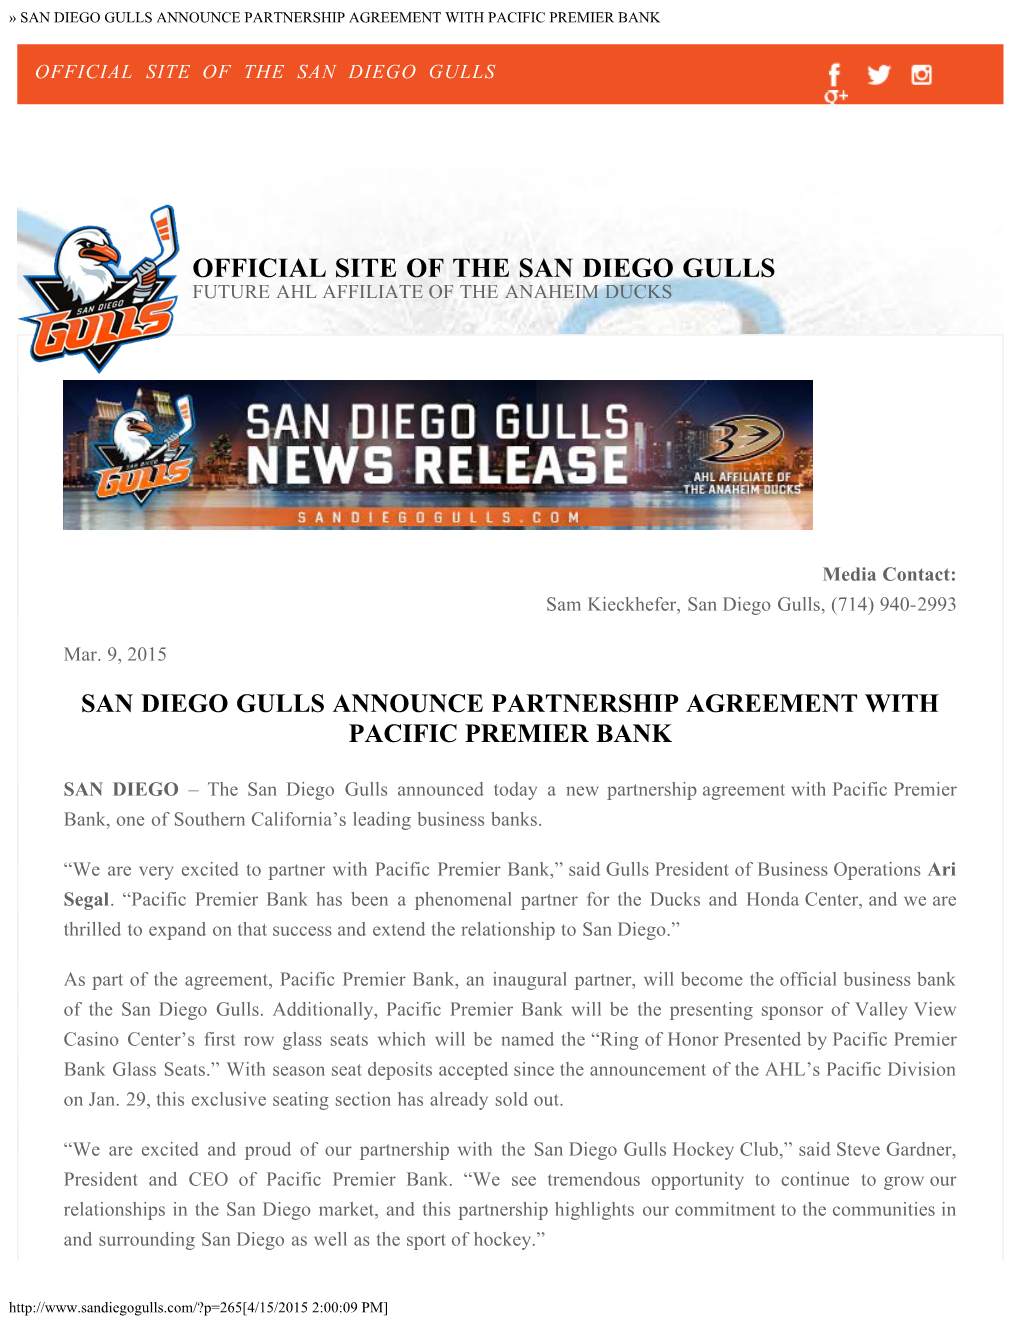 San Diego Gulls Announce Partnership Agreement with Pacific Premier Bank